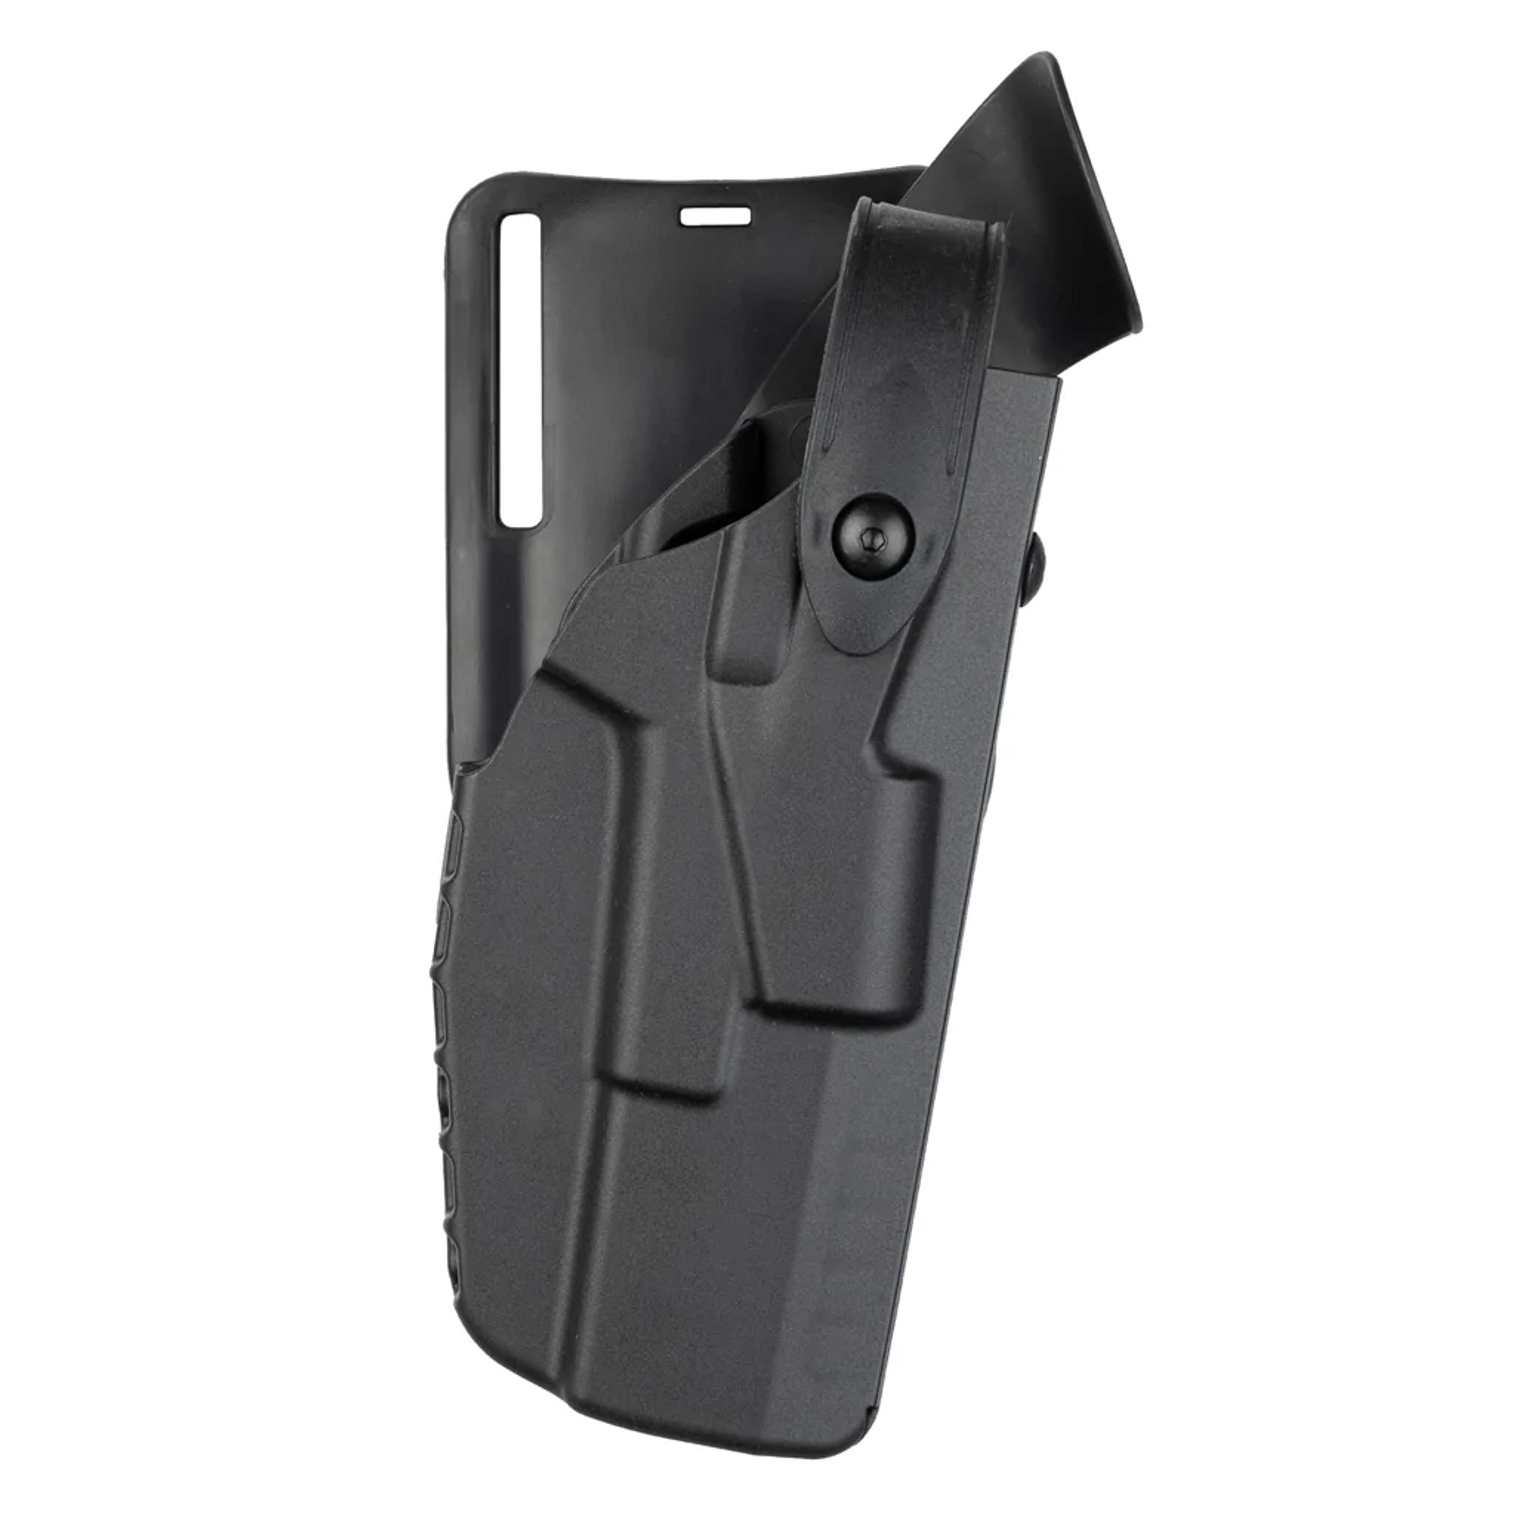 Model 7365 7ts Als/sls Low-ride, Level Iii Retention Duty Holster For Sig Sauer P320